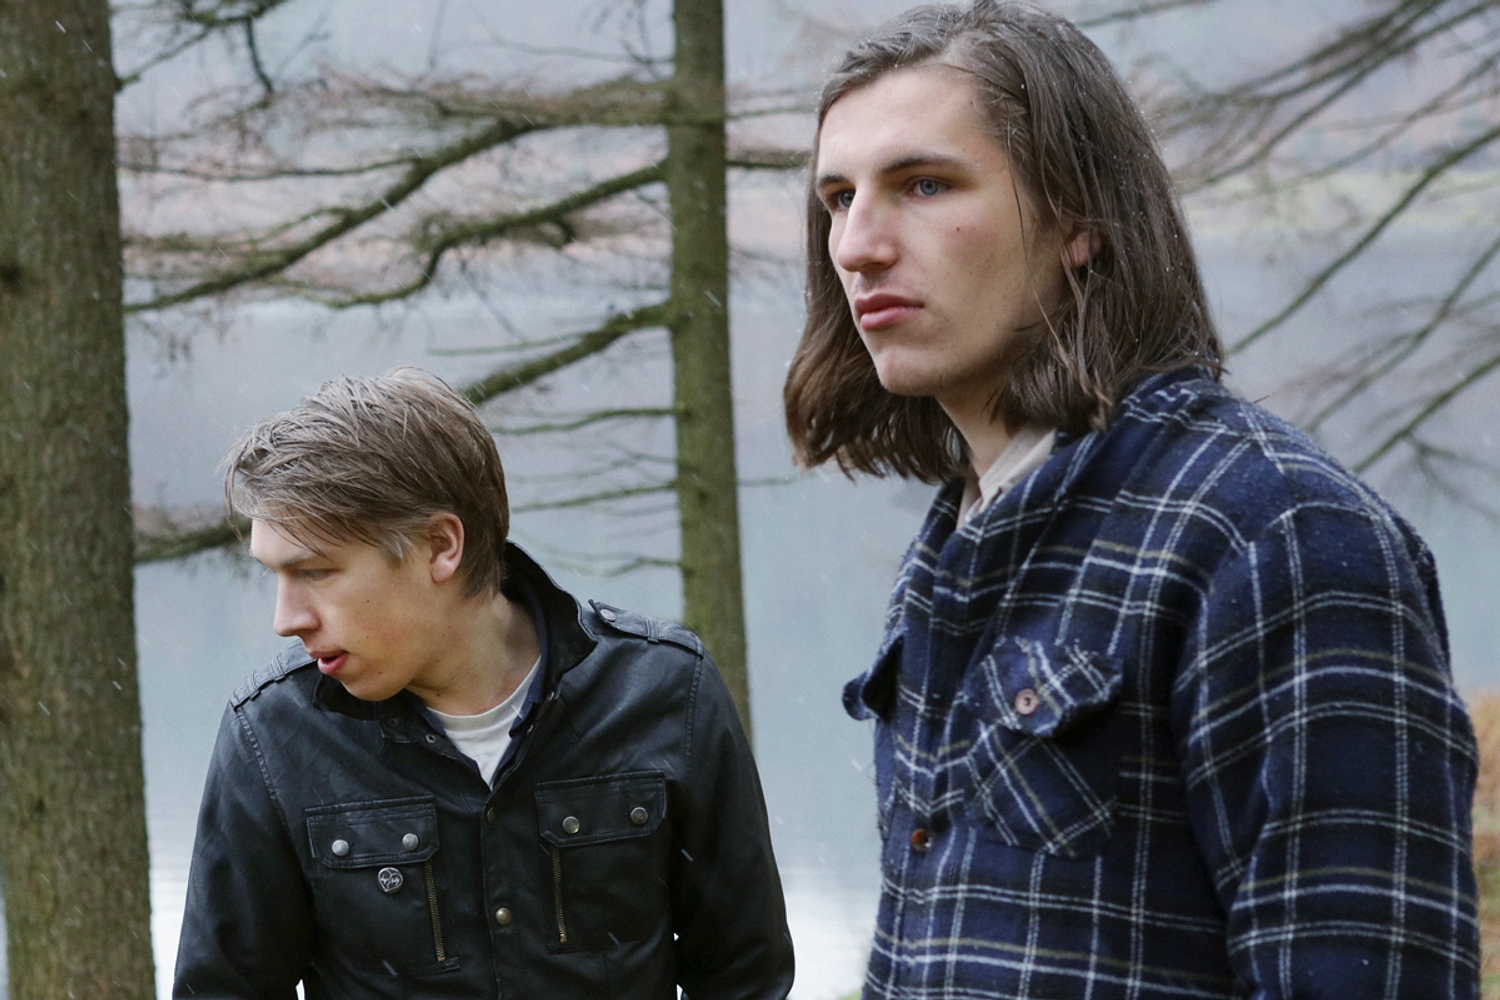 Drenge to take on your questions in DIY’s Popstar Postbag